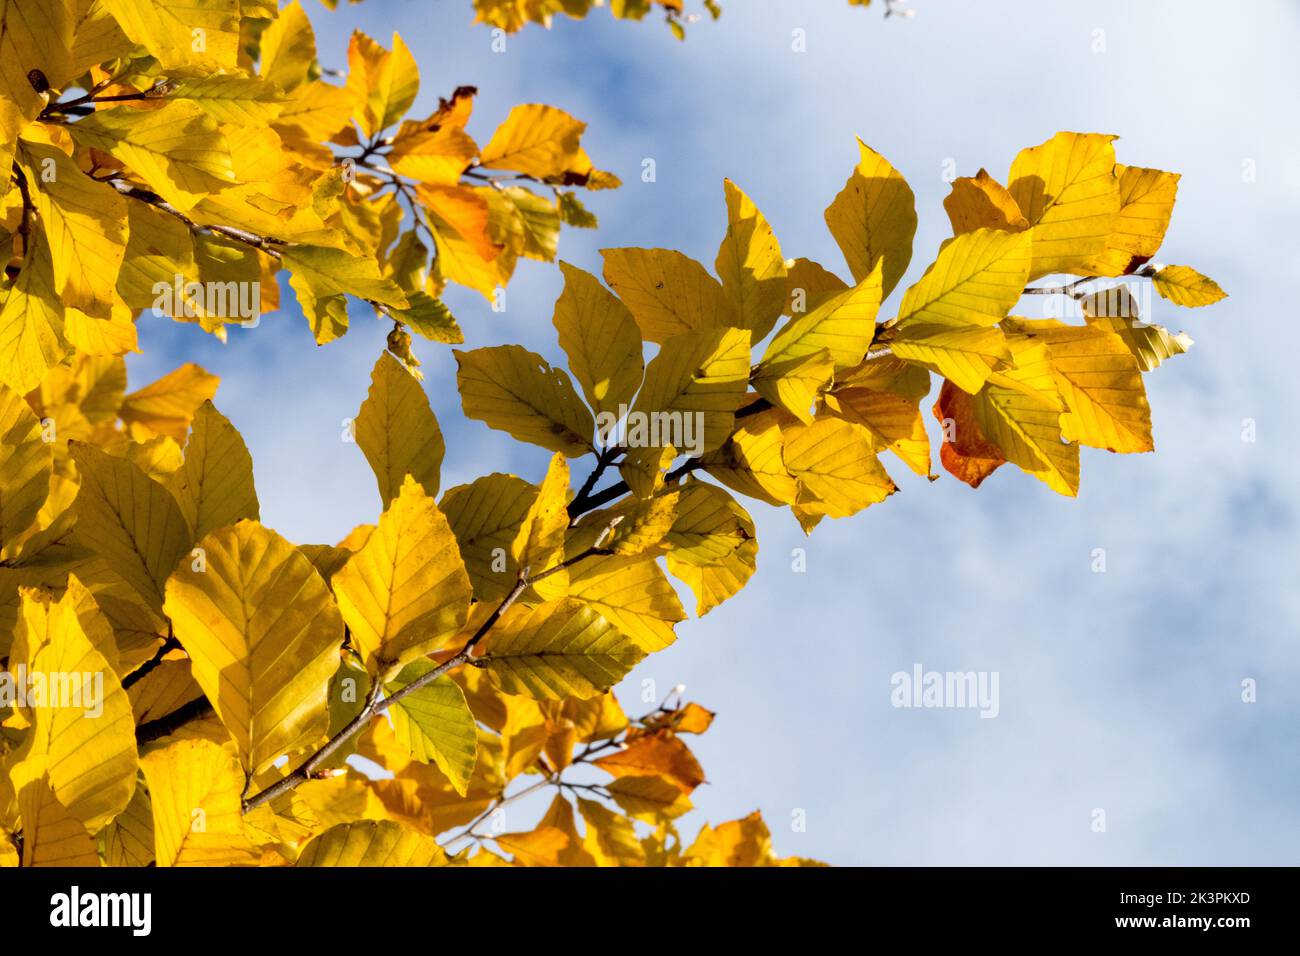 Autumn, Beech, Leaves on Branch in the Backlit, Fagus crenata, Japanese Beech, Yellow leaves, Sunny, Foliage Fagus autumn leaves Stock Photo